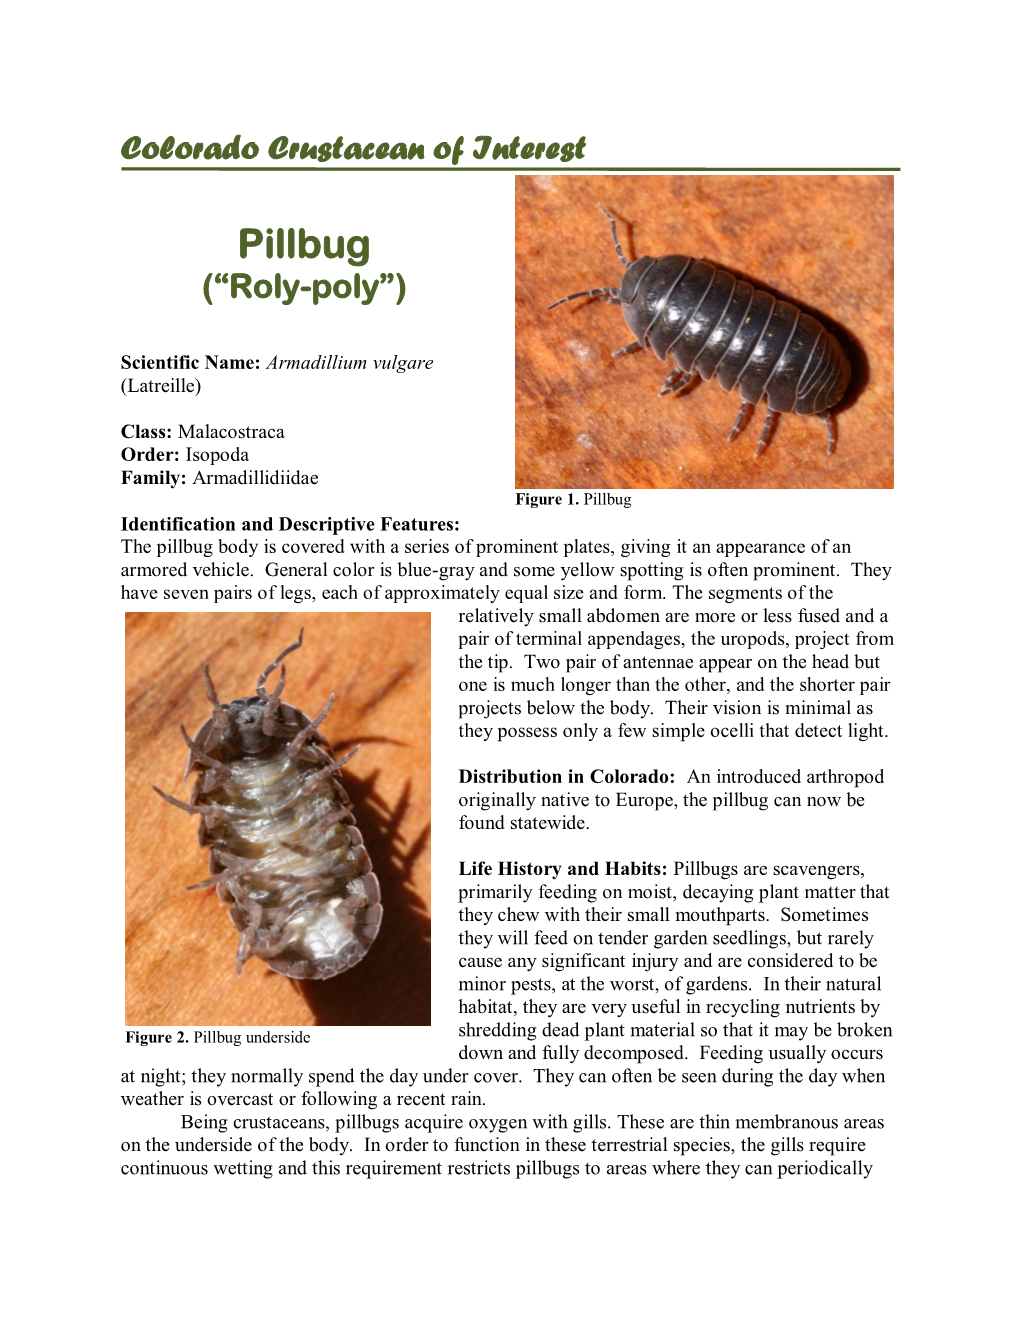 Pillbugs Are Scavengers, Primarily Feeding on Moist, Decaying Plant Matter That They Chew with Their Small Mouthparts